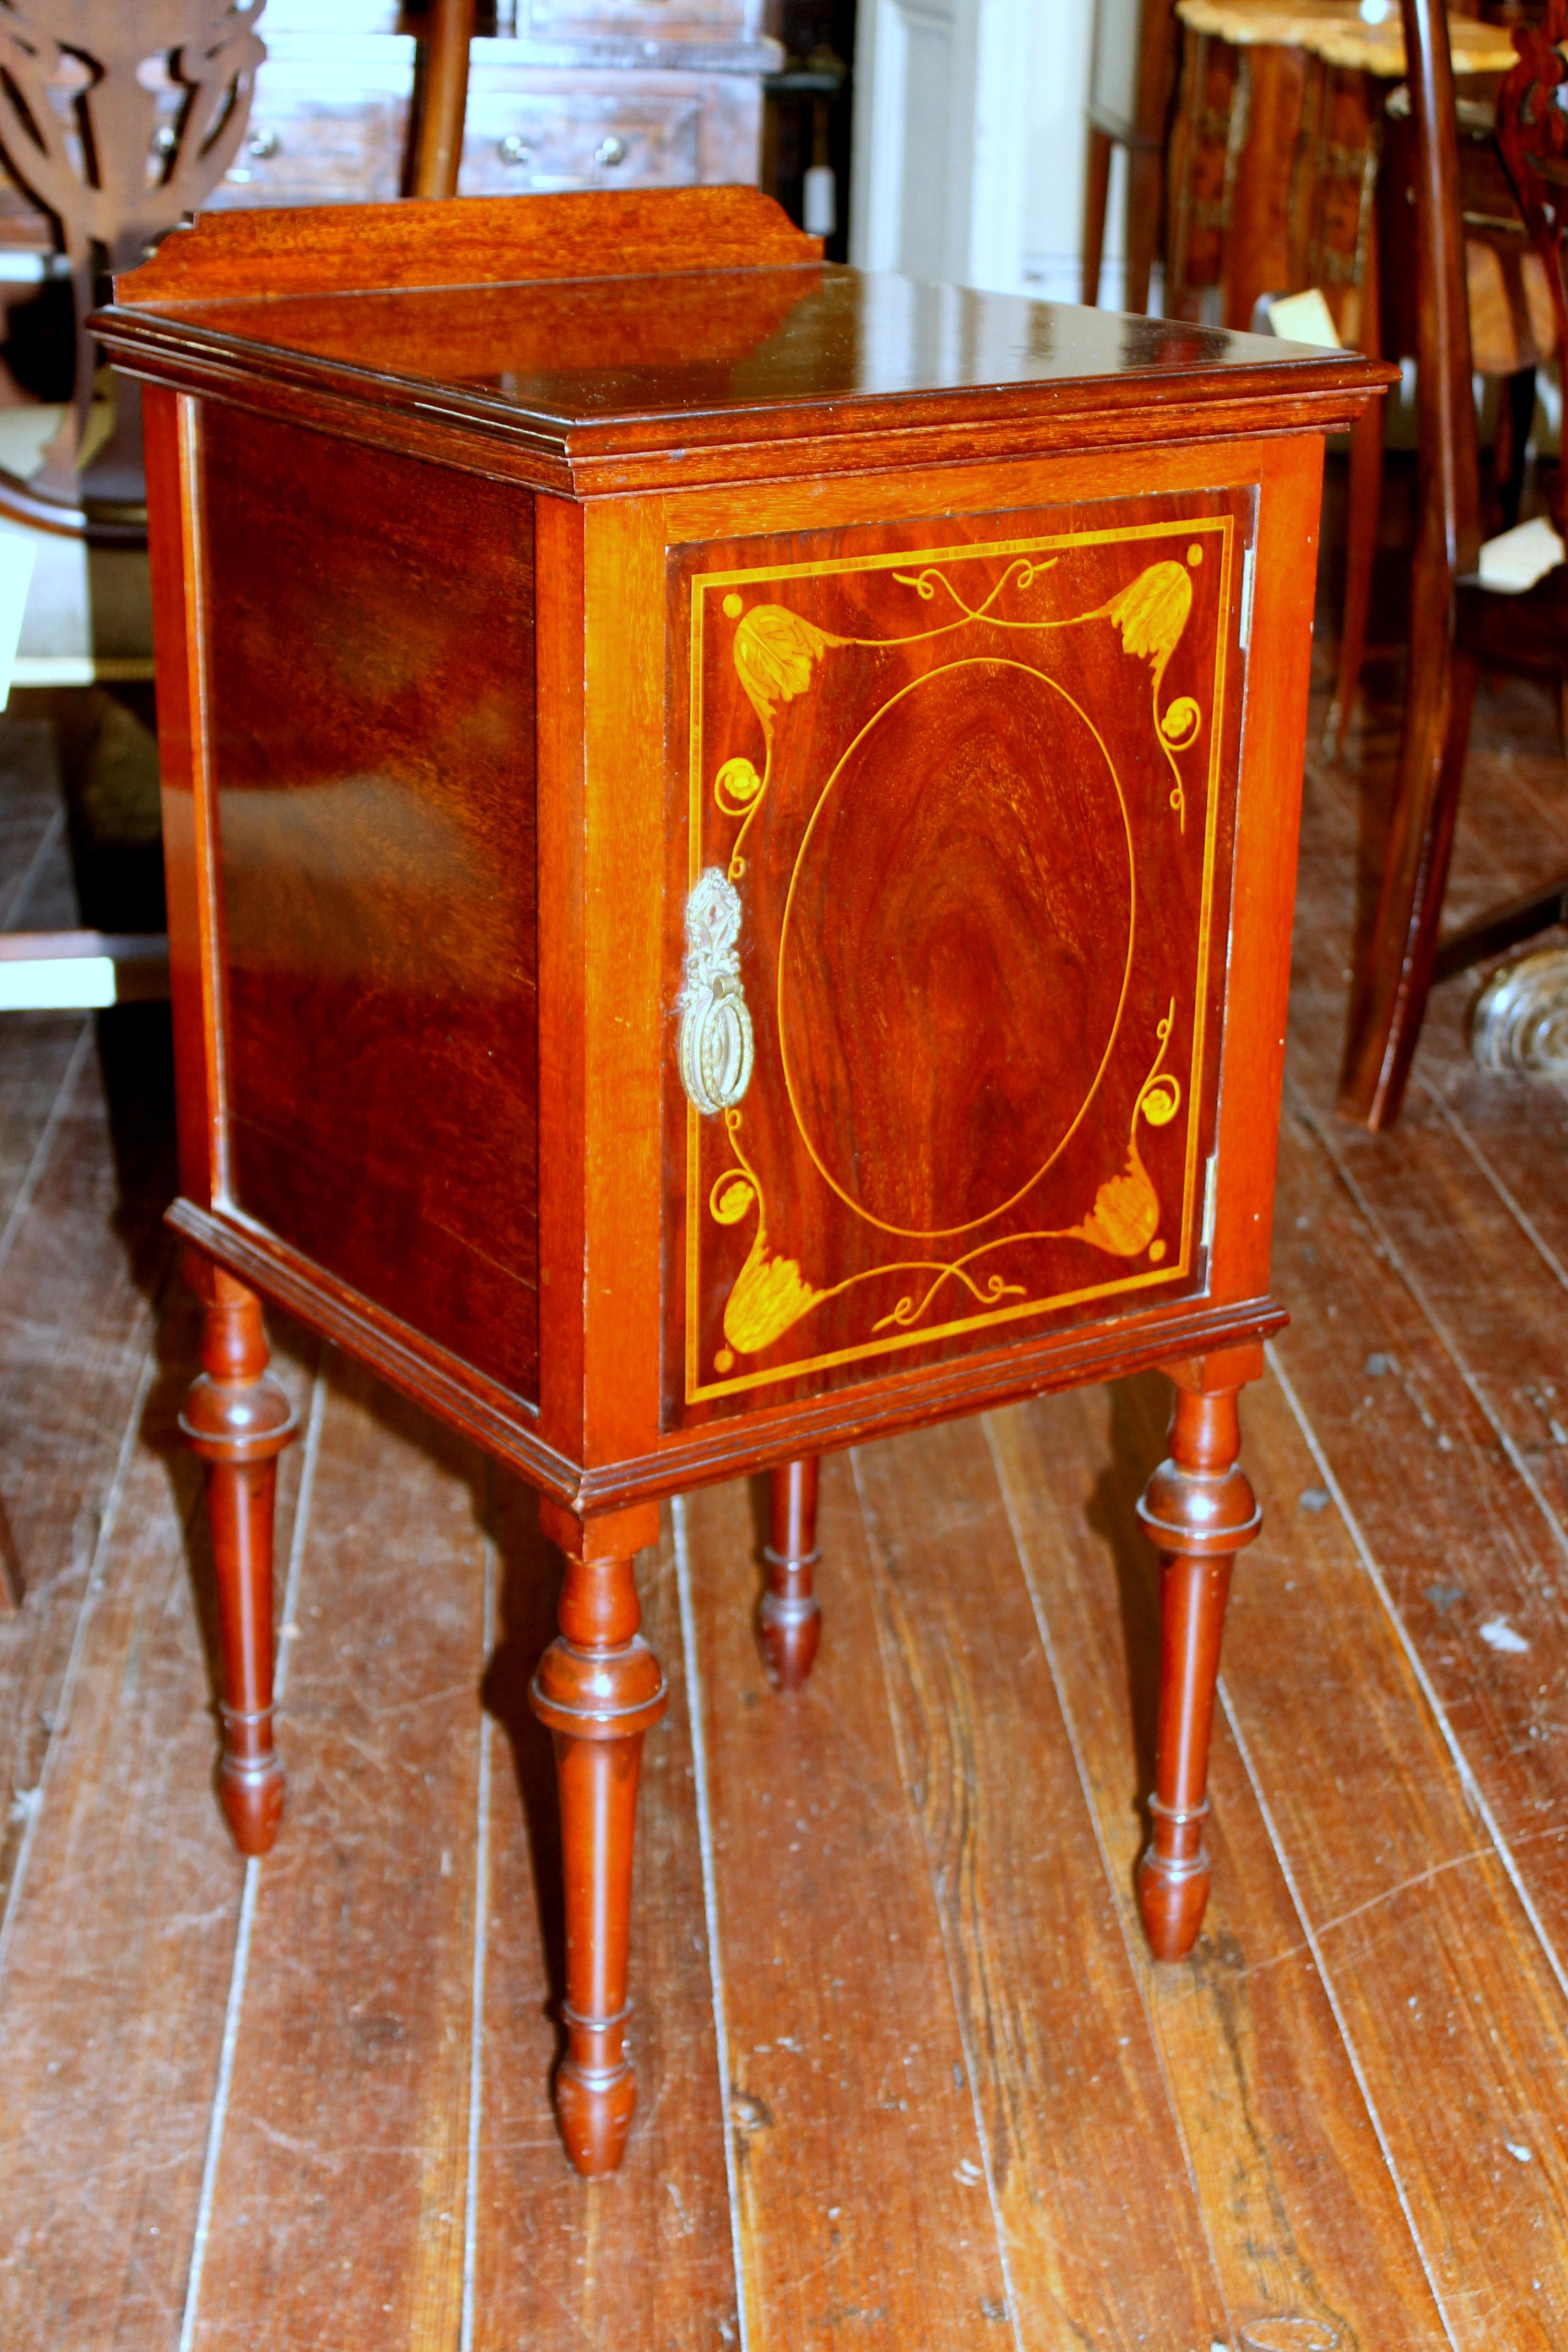 Superb antique English marquetry inlaid mahogany bedside/ chair-side cabinet.

Please note handsome tulip wood narrow inlaid banding and fabulous satinwood bellflowers. 
Some top distress marks noted in the images and do not deter from the